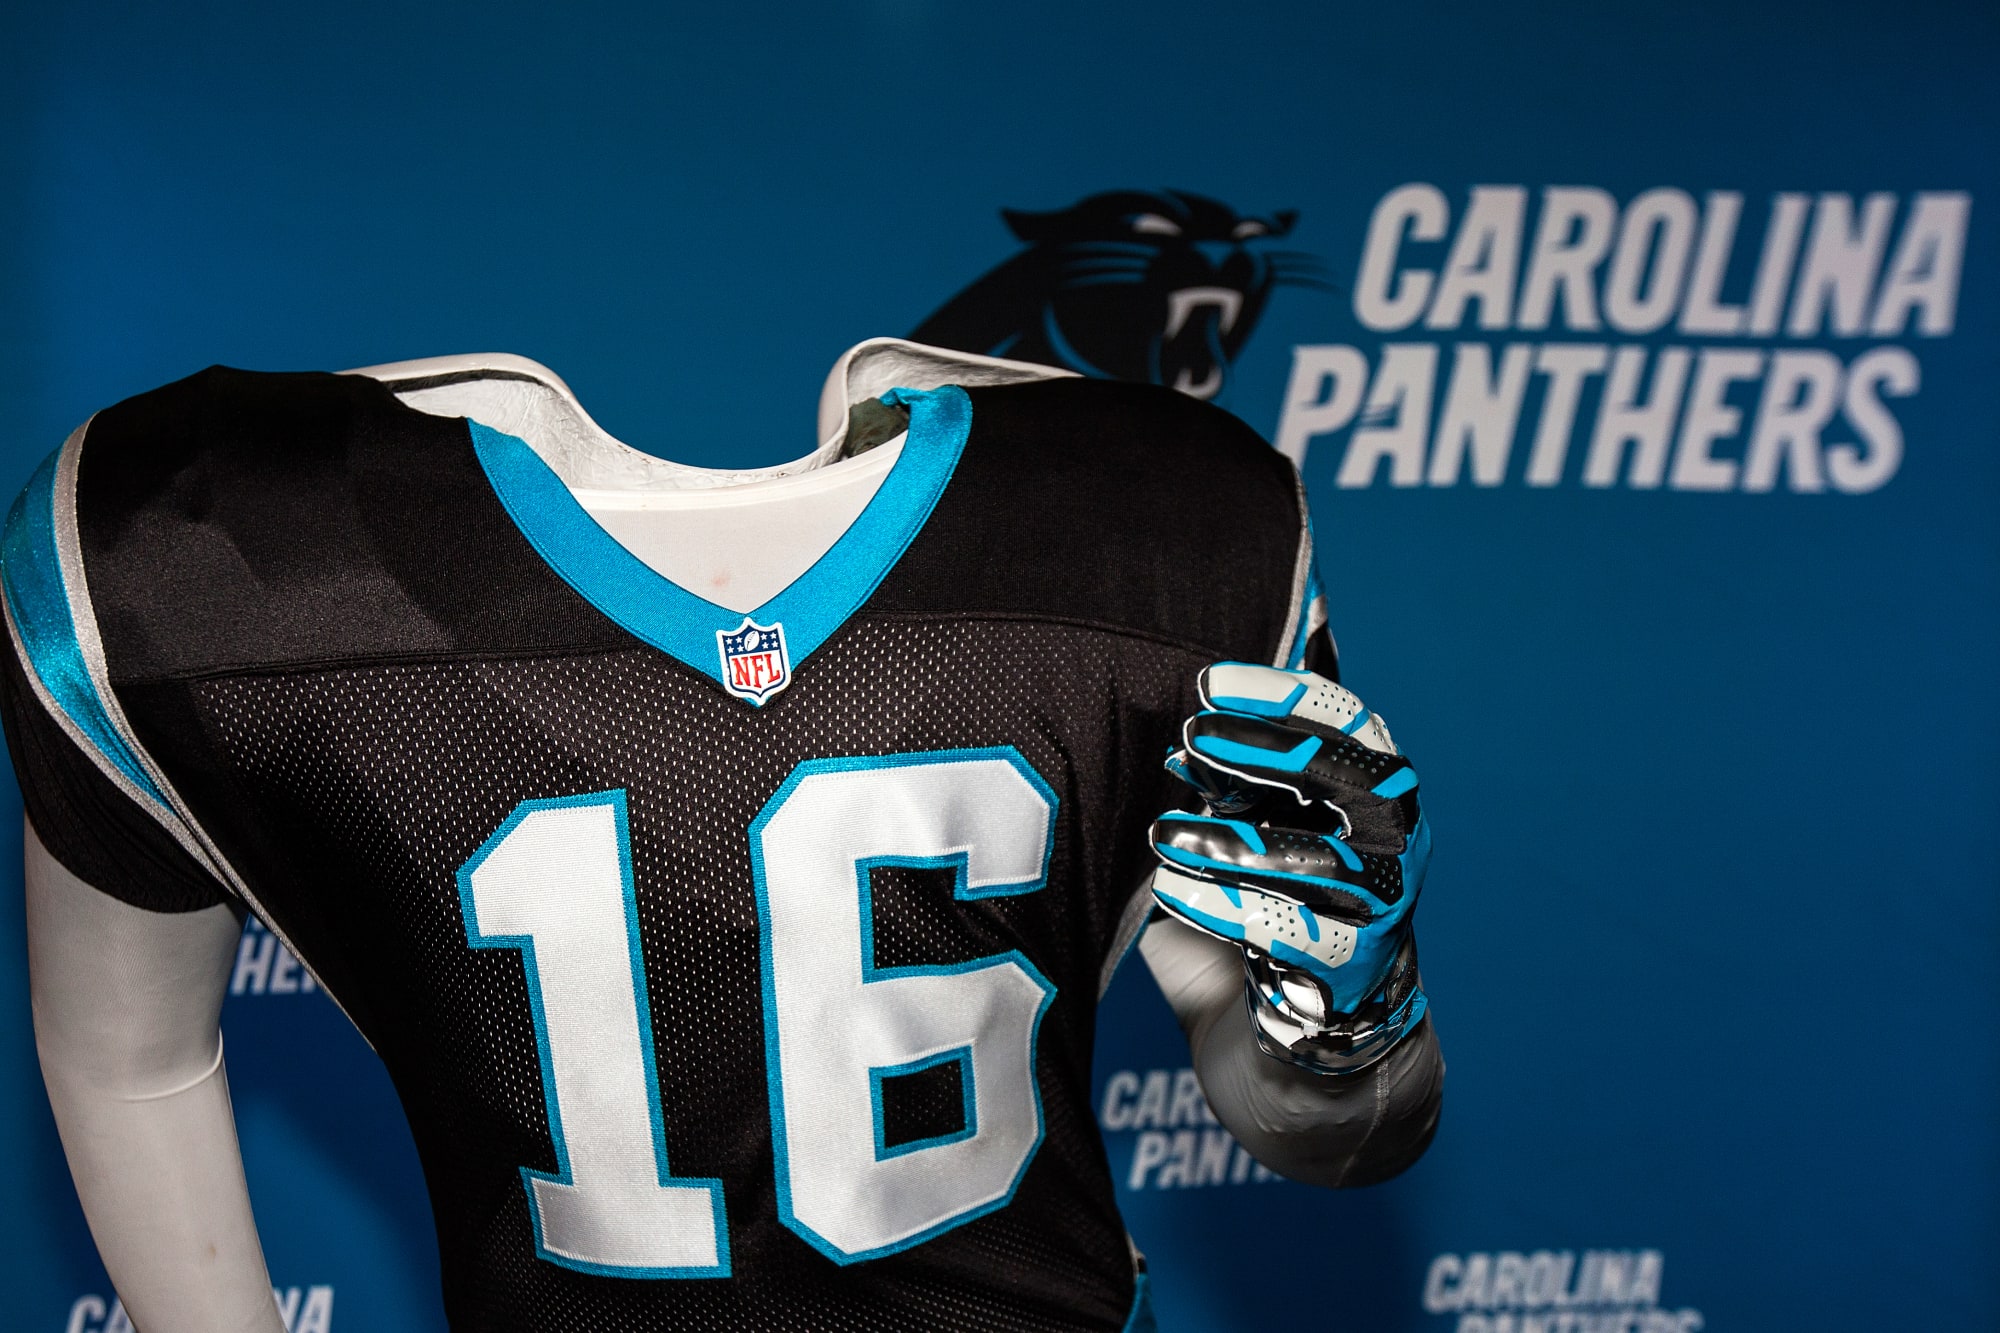 panthers jersey for cat